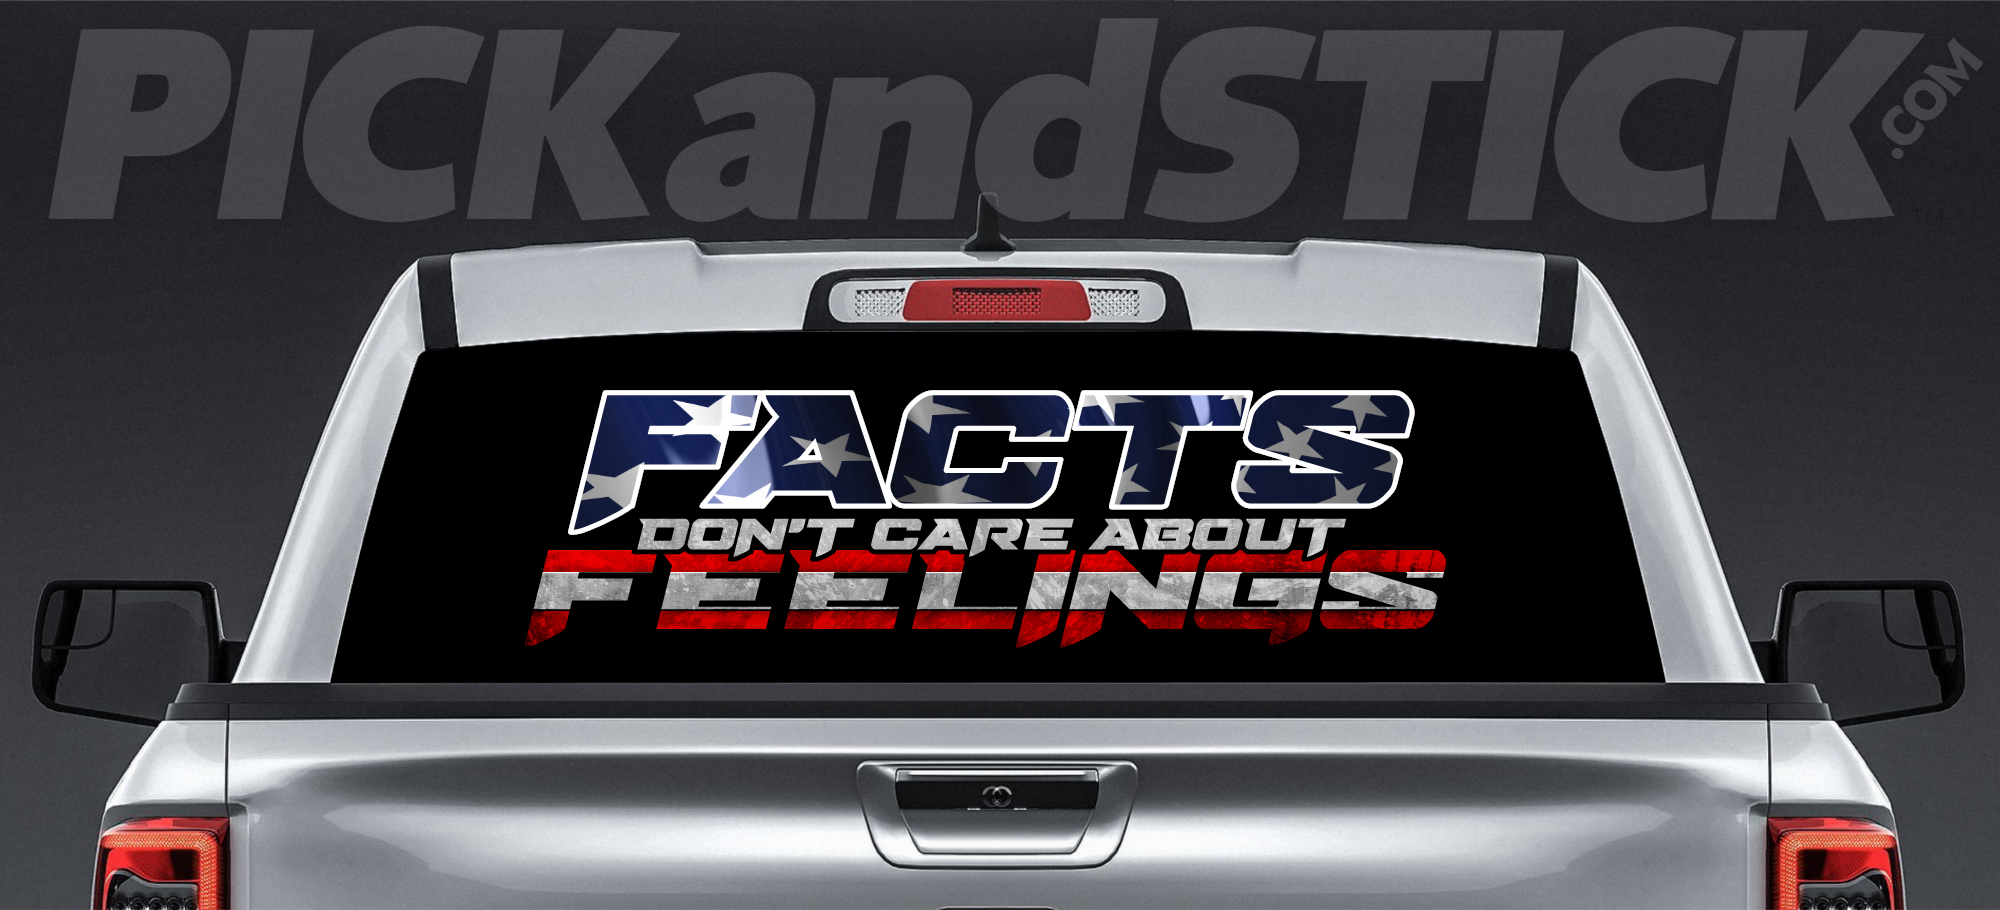 Facts Don't Care About Feelings - Window Decal Sticker